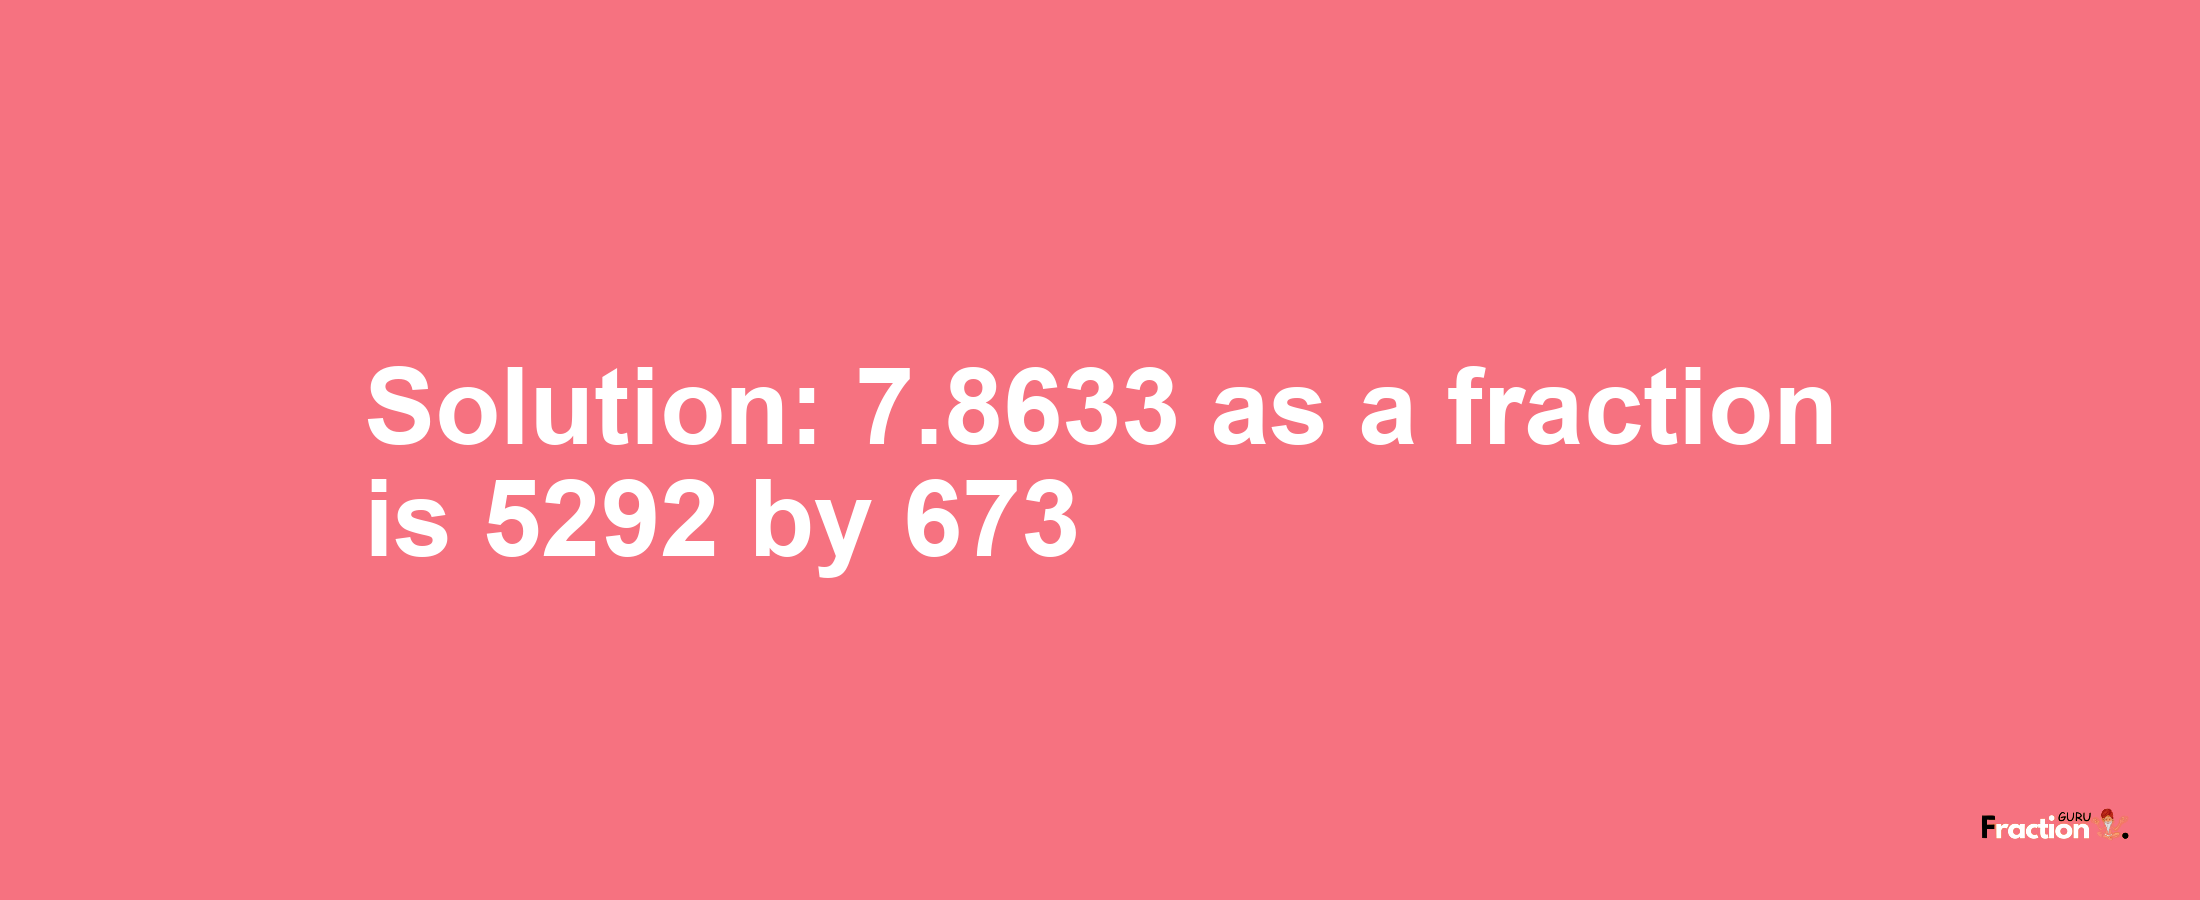 Solution:7.8633 as a fraction is 5292/673